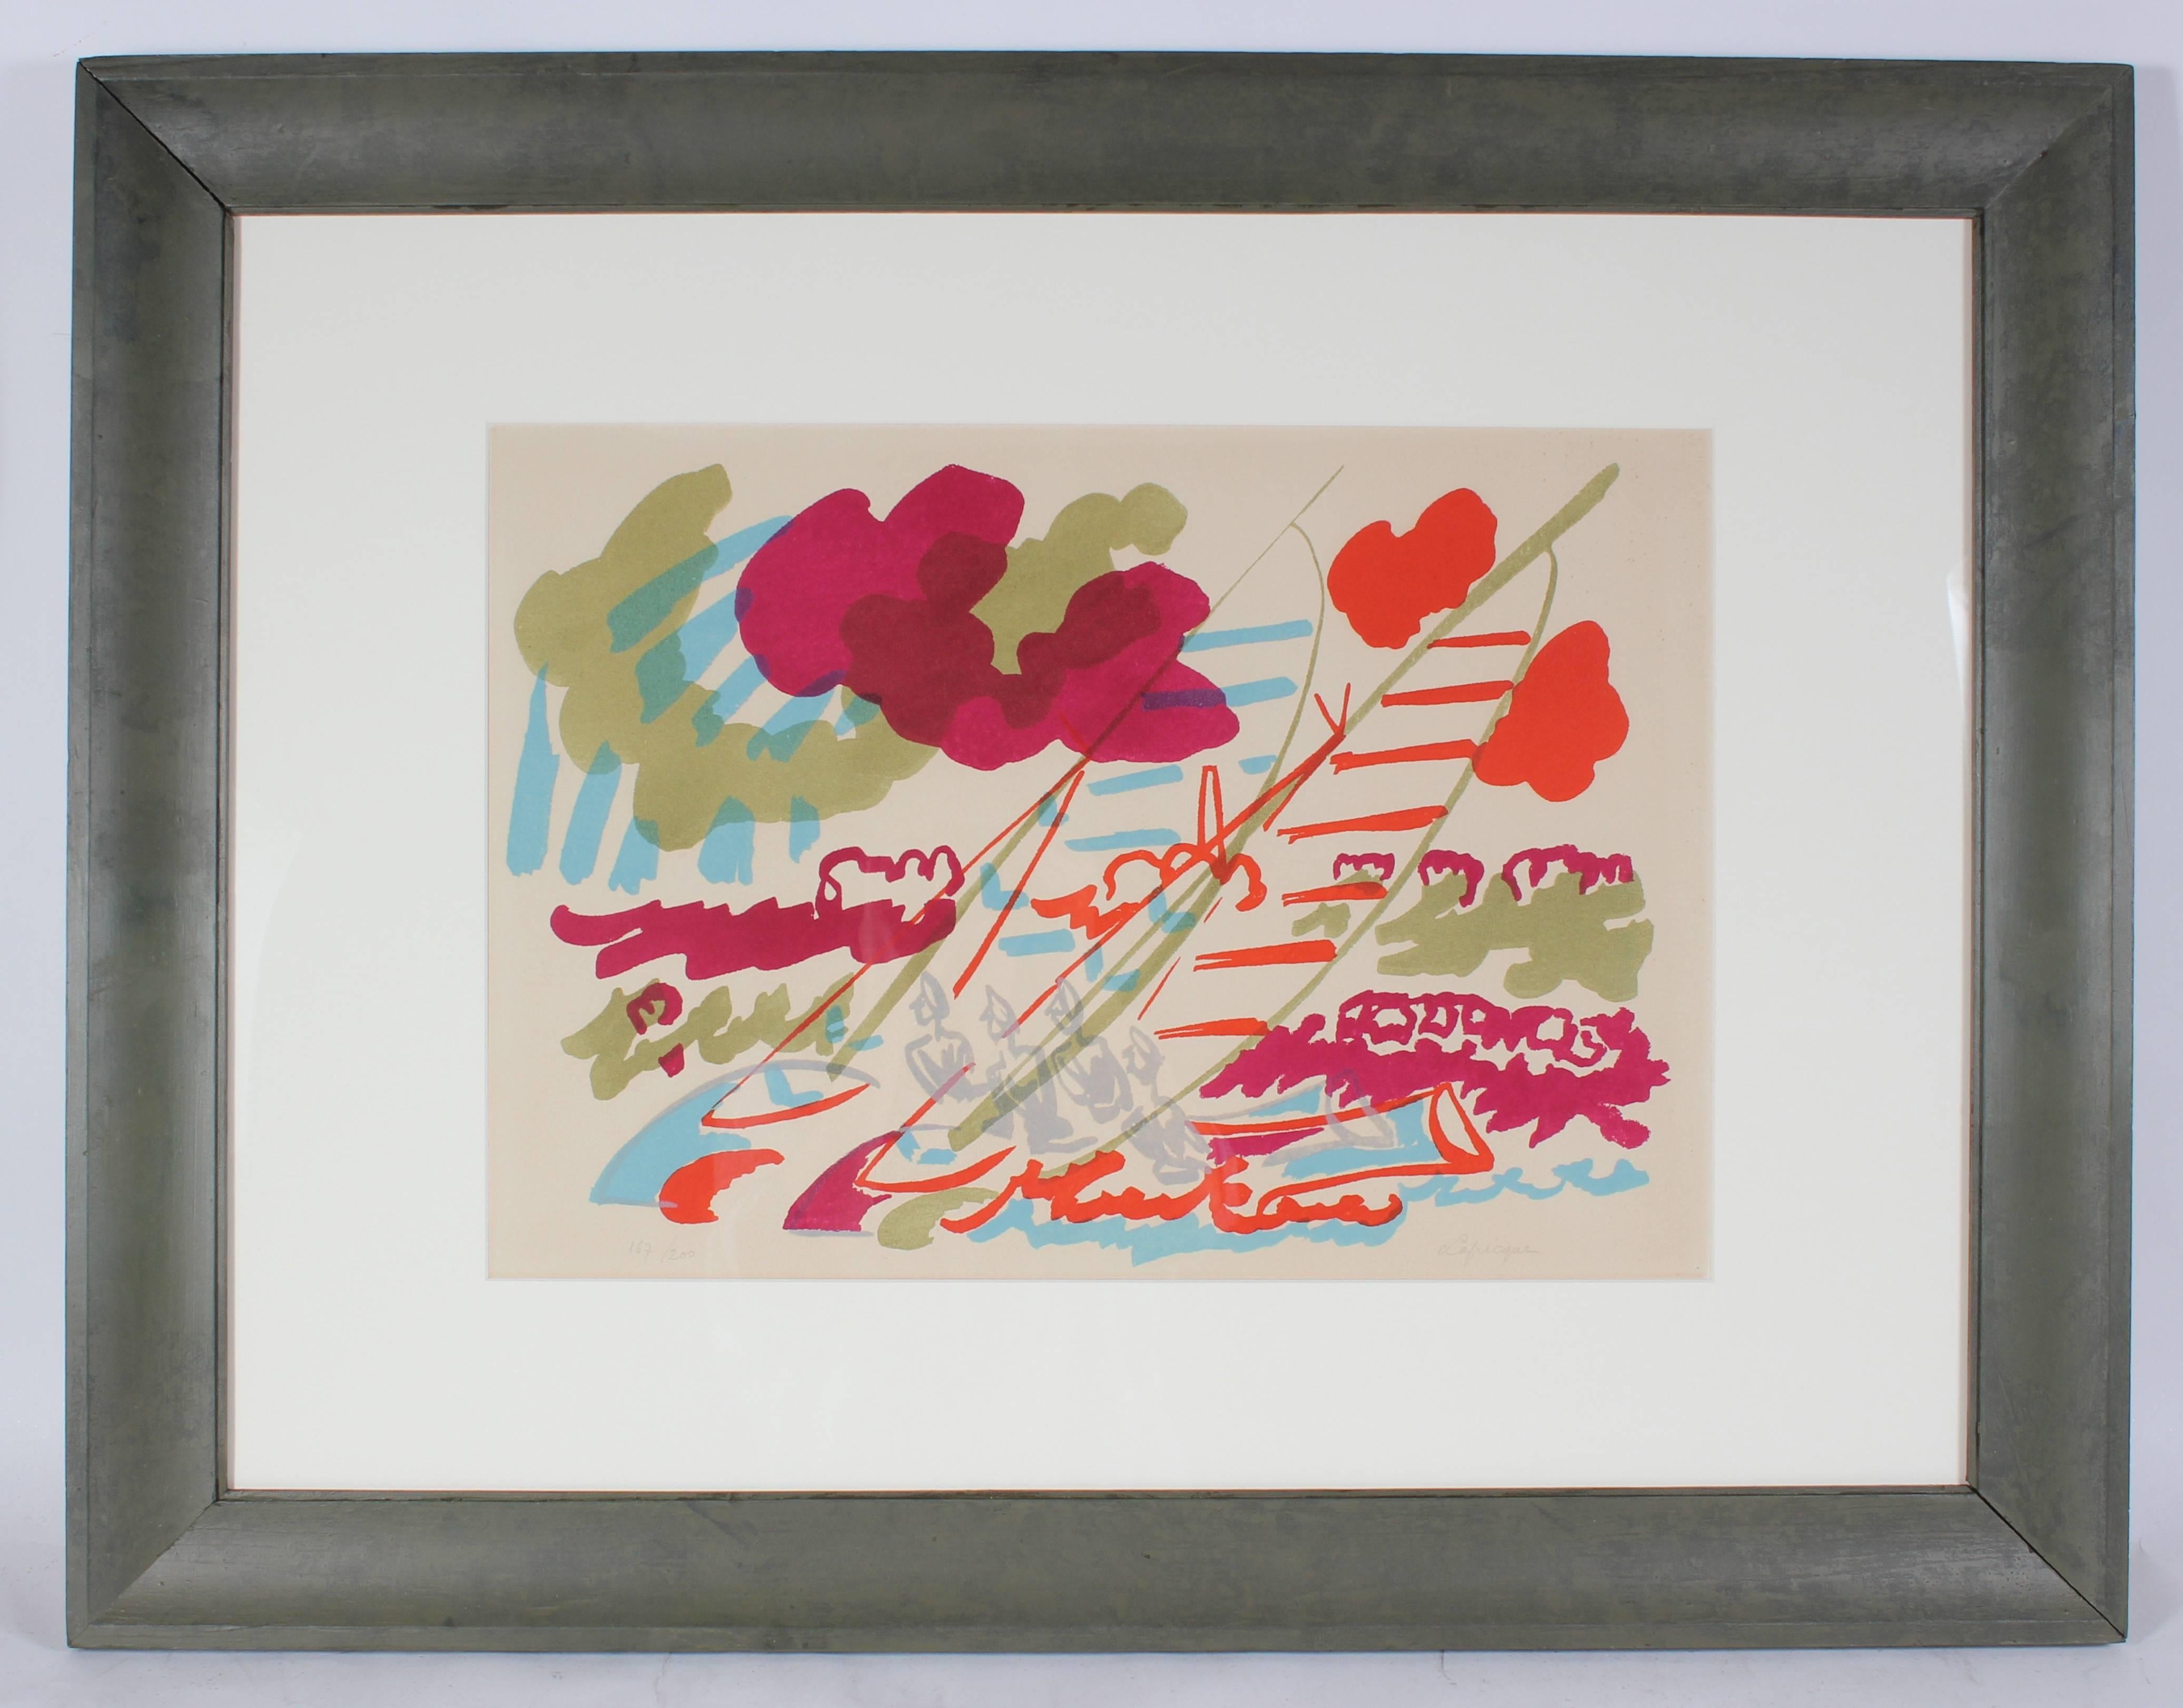 Charles Lapicque Landscape Print - "Boat Races" Bright Abstracted Seascape Serigraph, 20th Century